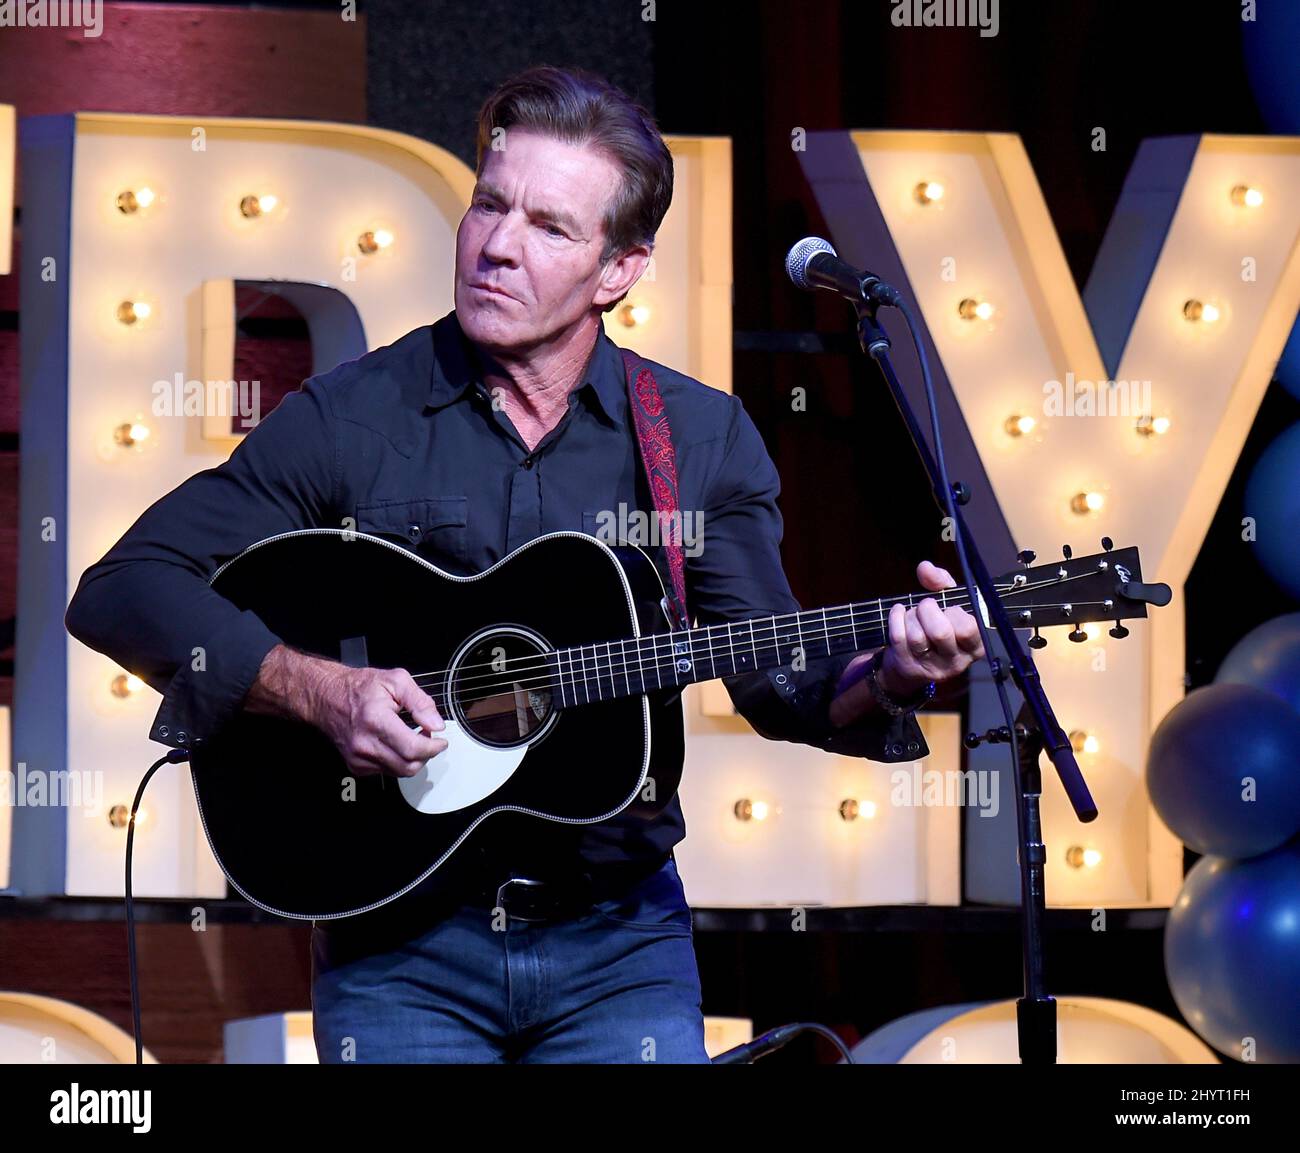 Dennis Quaid beim Waverly Strong: A Concert for Disaster Relief am 7. September 2021 in der City Winery in Nashville, TN. Stockfoto